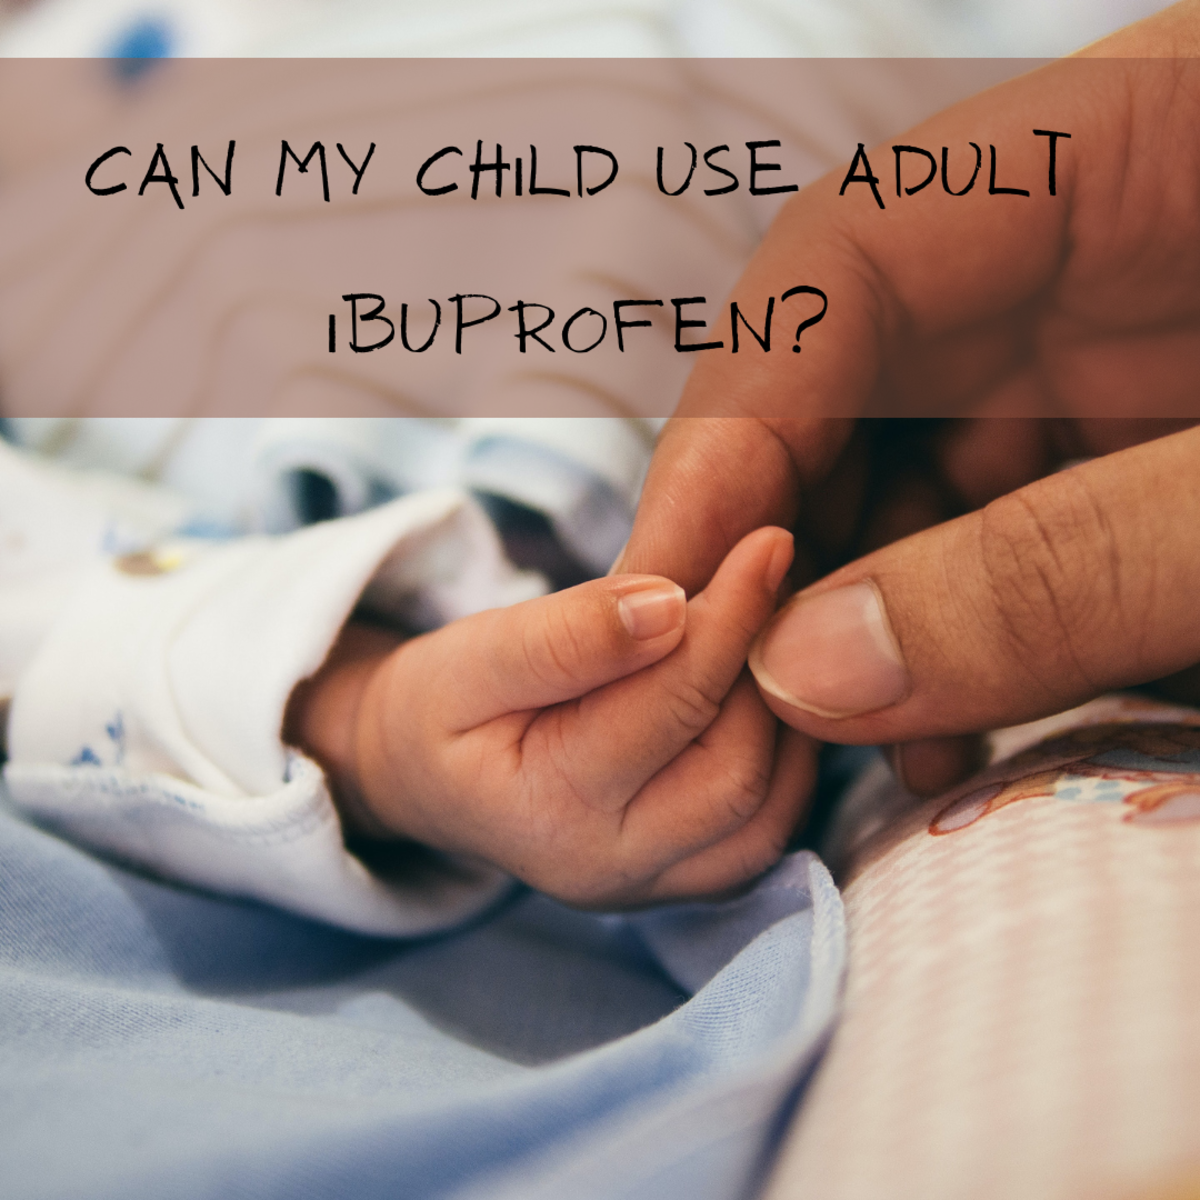 Can your child have ibuprofen?